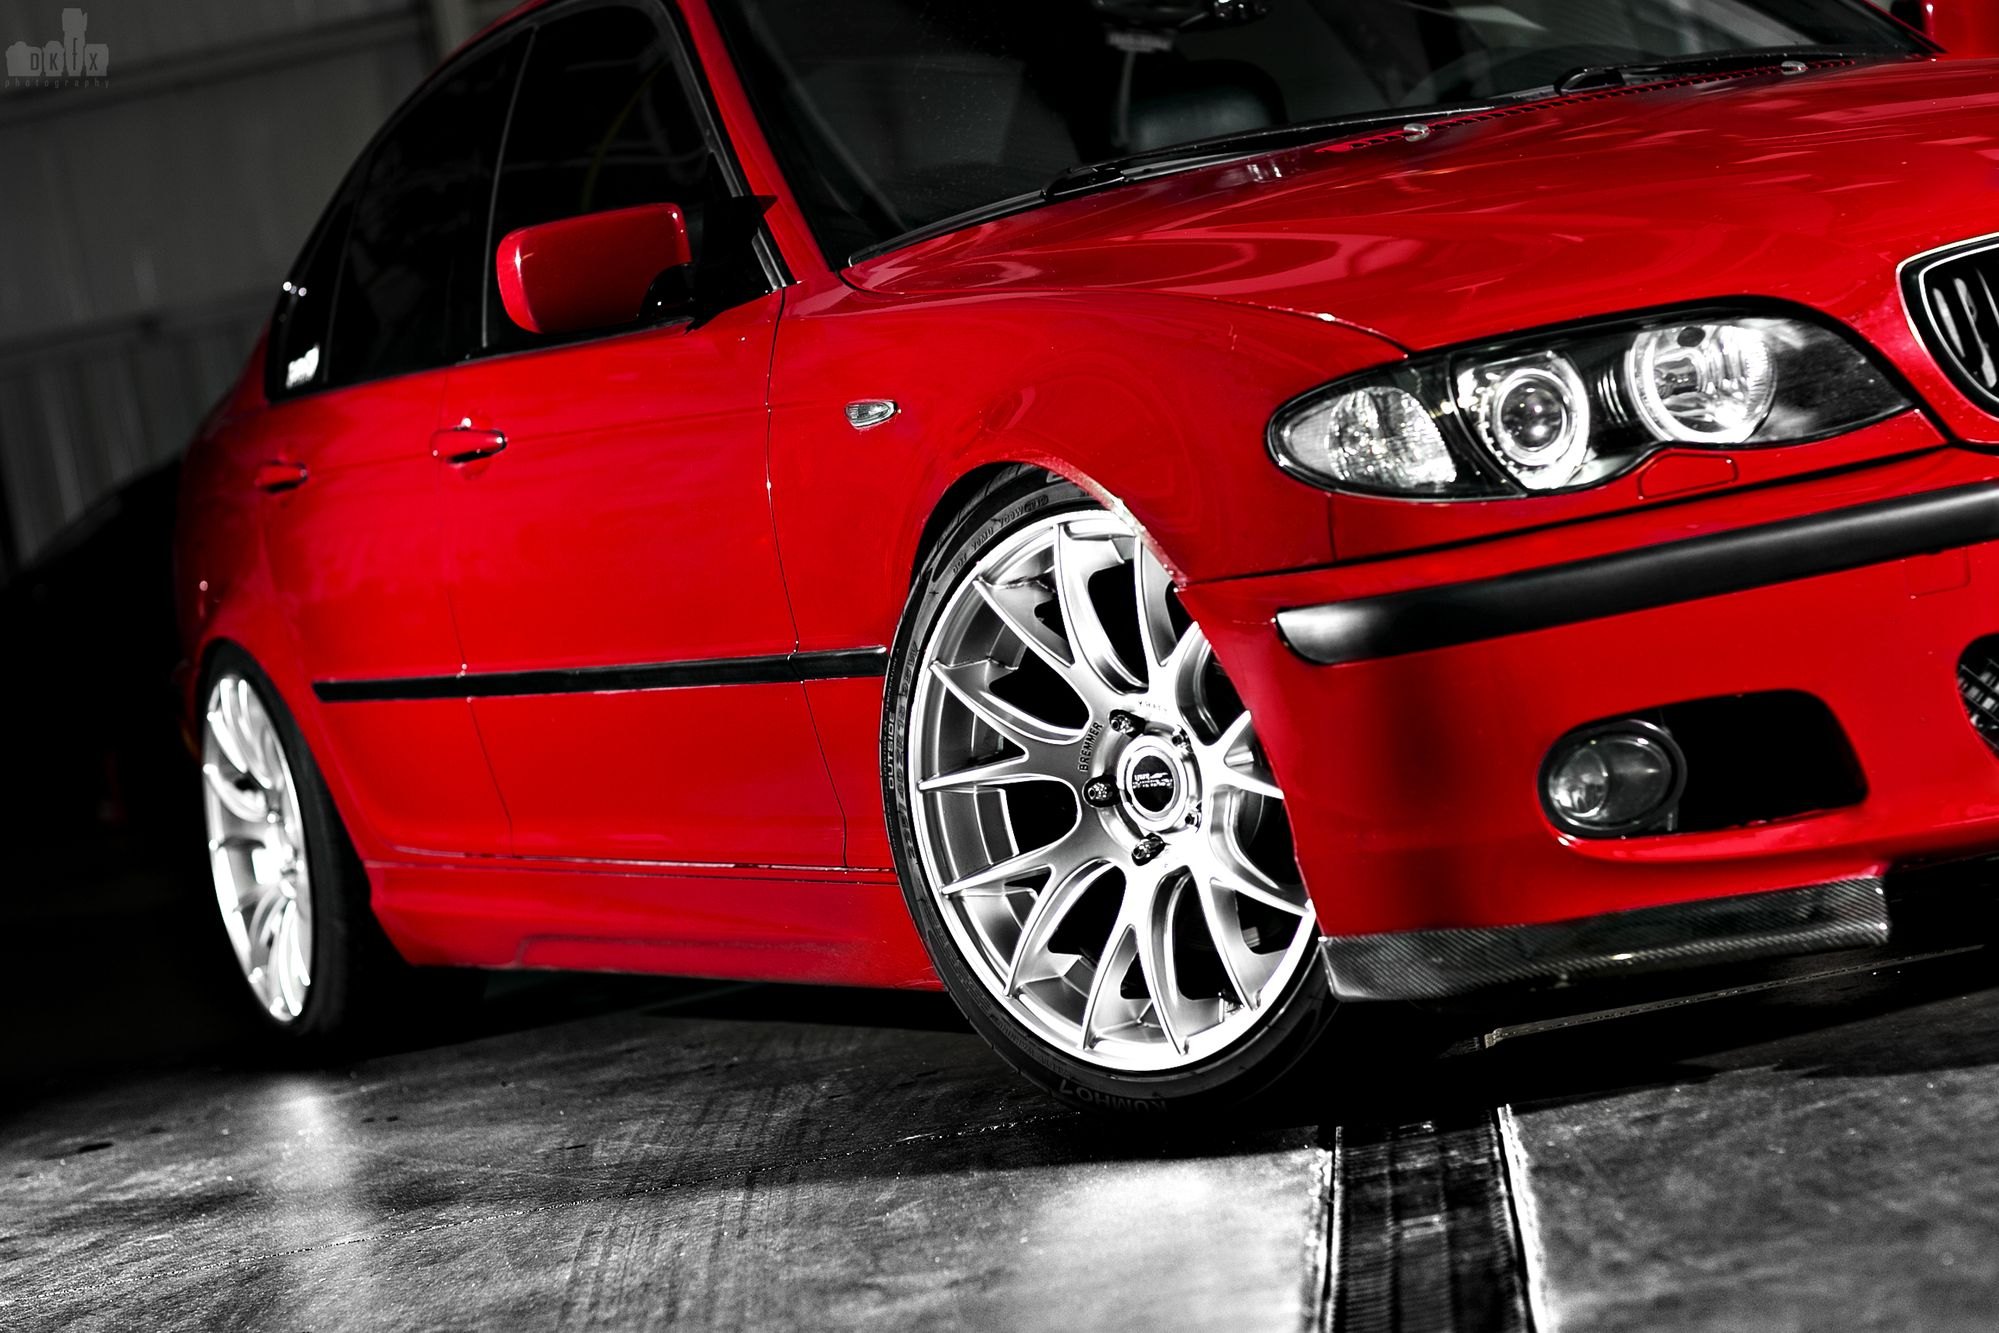 Carbon Fiber Canards on Red BMW 3-Series - Photo by dan kinzie